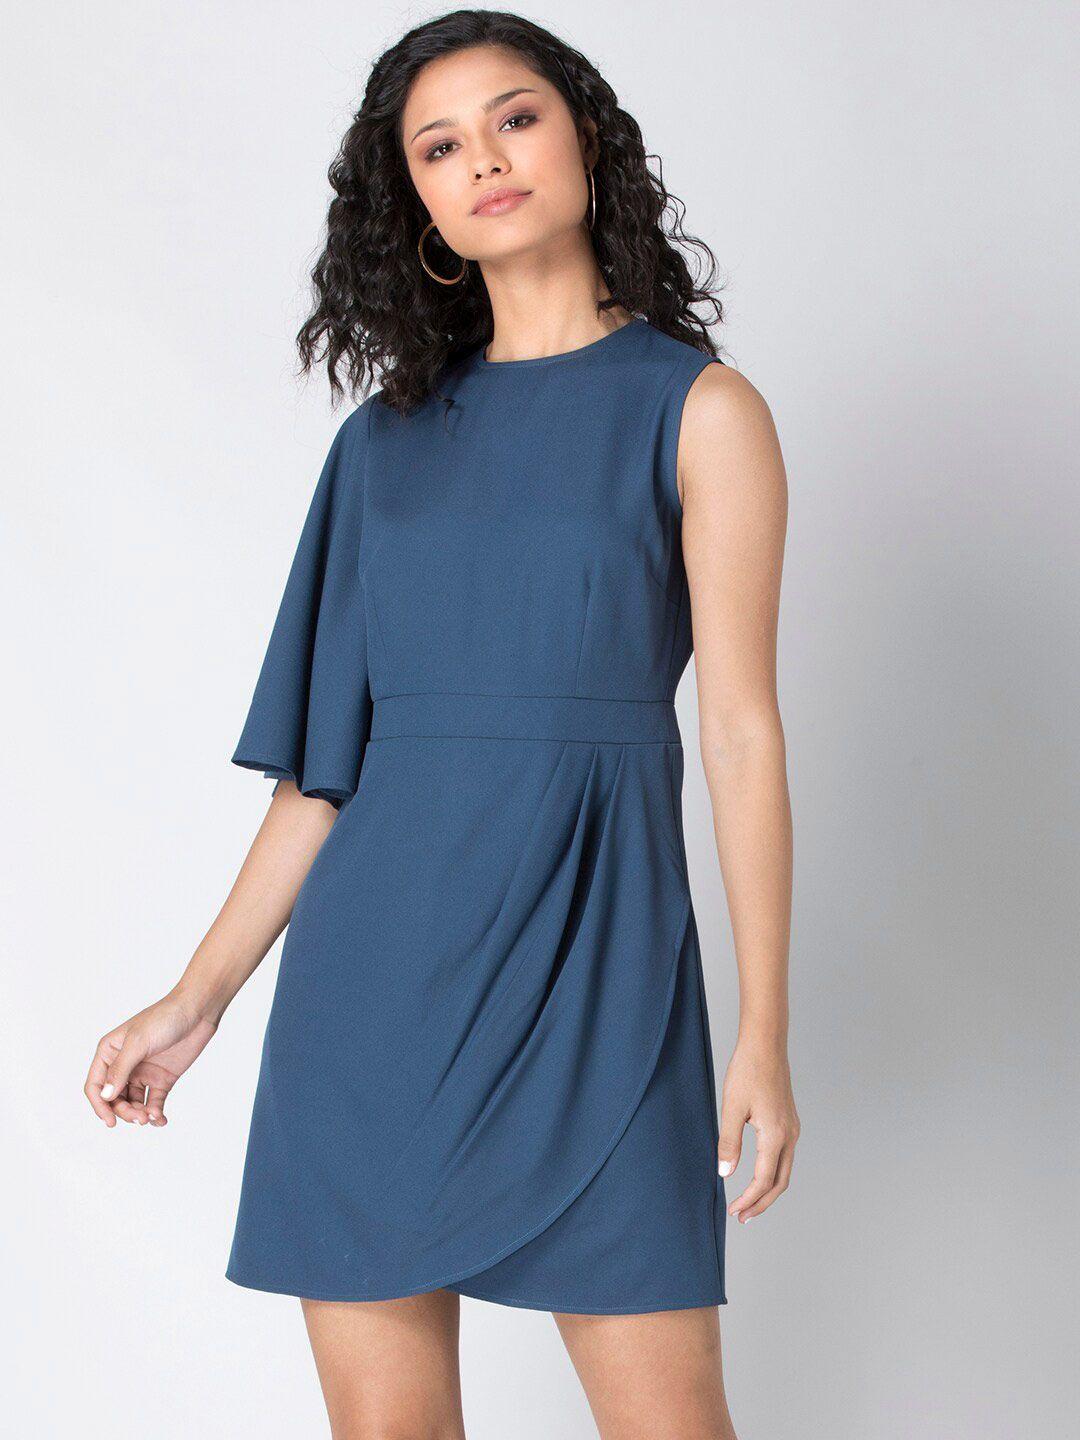 faballey-round-neck-one-sleeve-a-line-dress